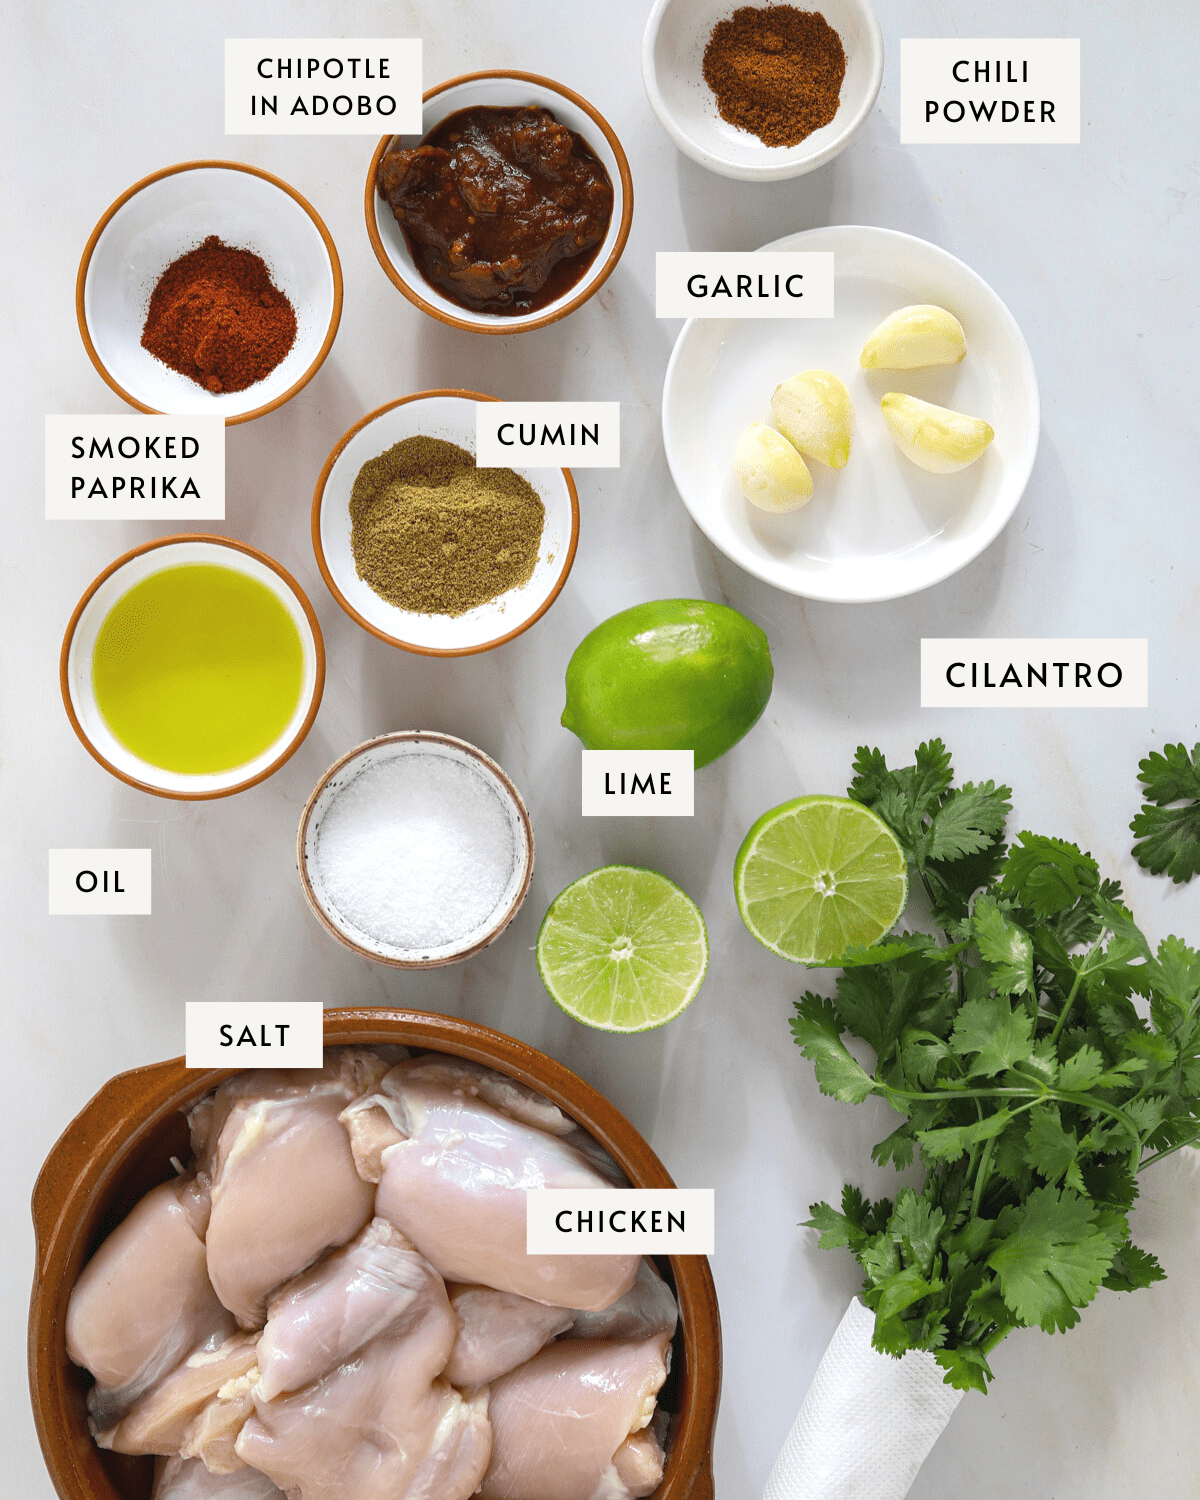 Six individual mall bowls filled with spices, salt and oil. A lime cut in half, a bundle of cilantro, a bowl of chicken on a blue background.